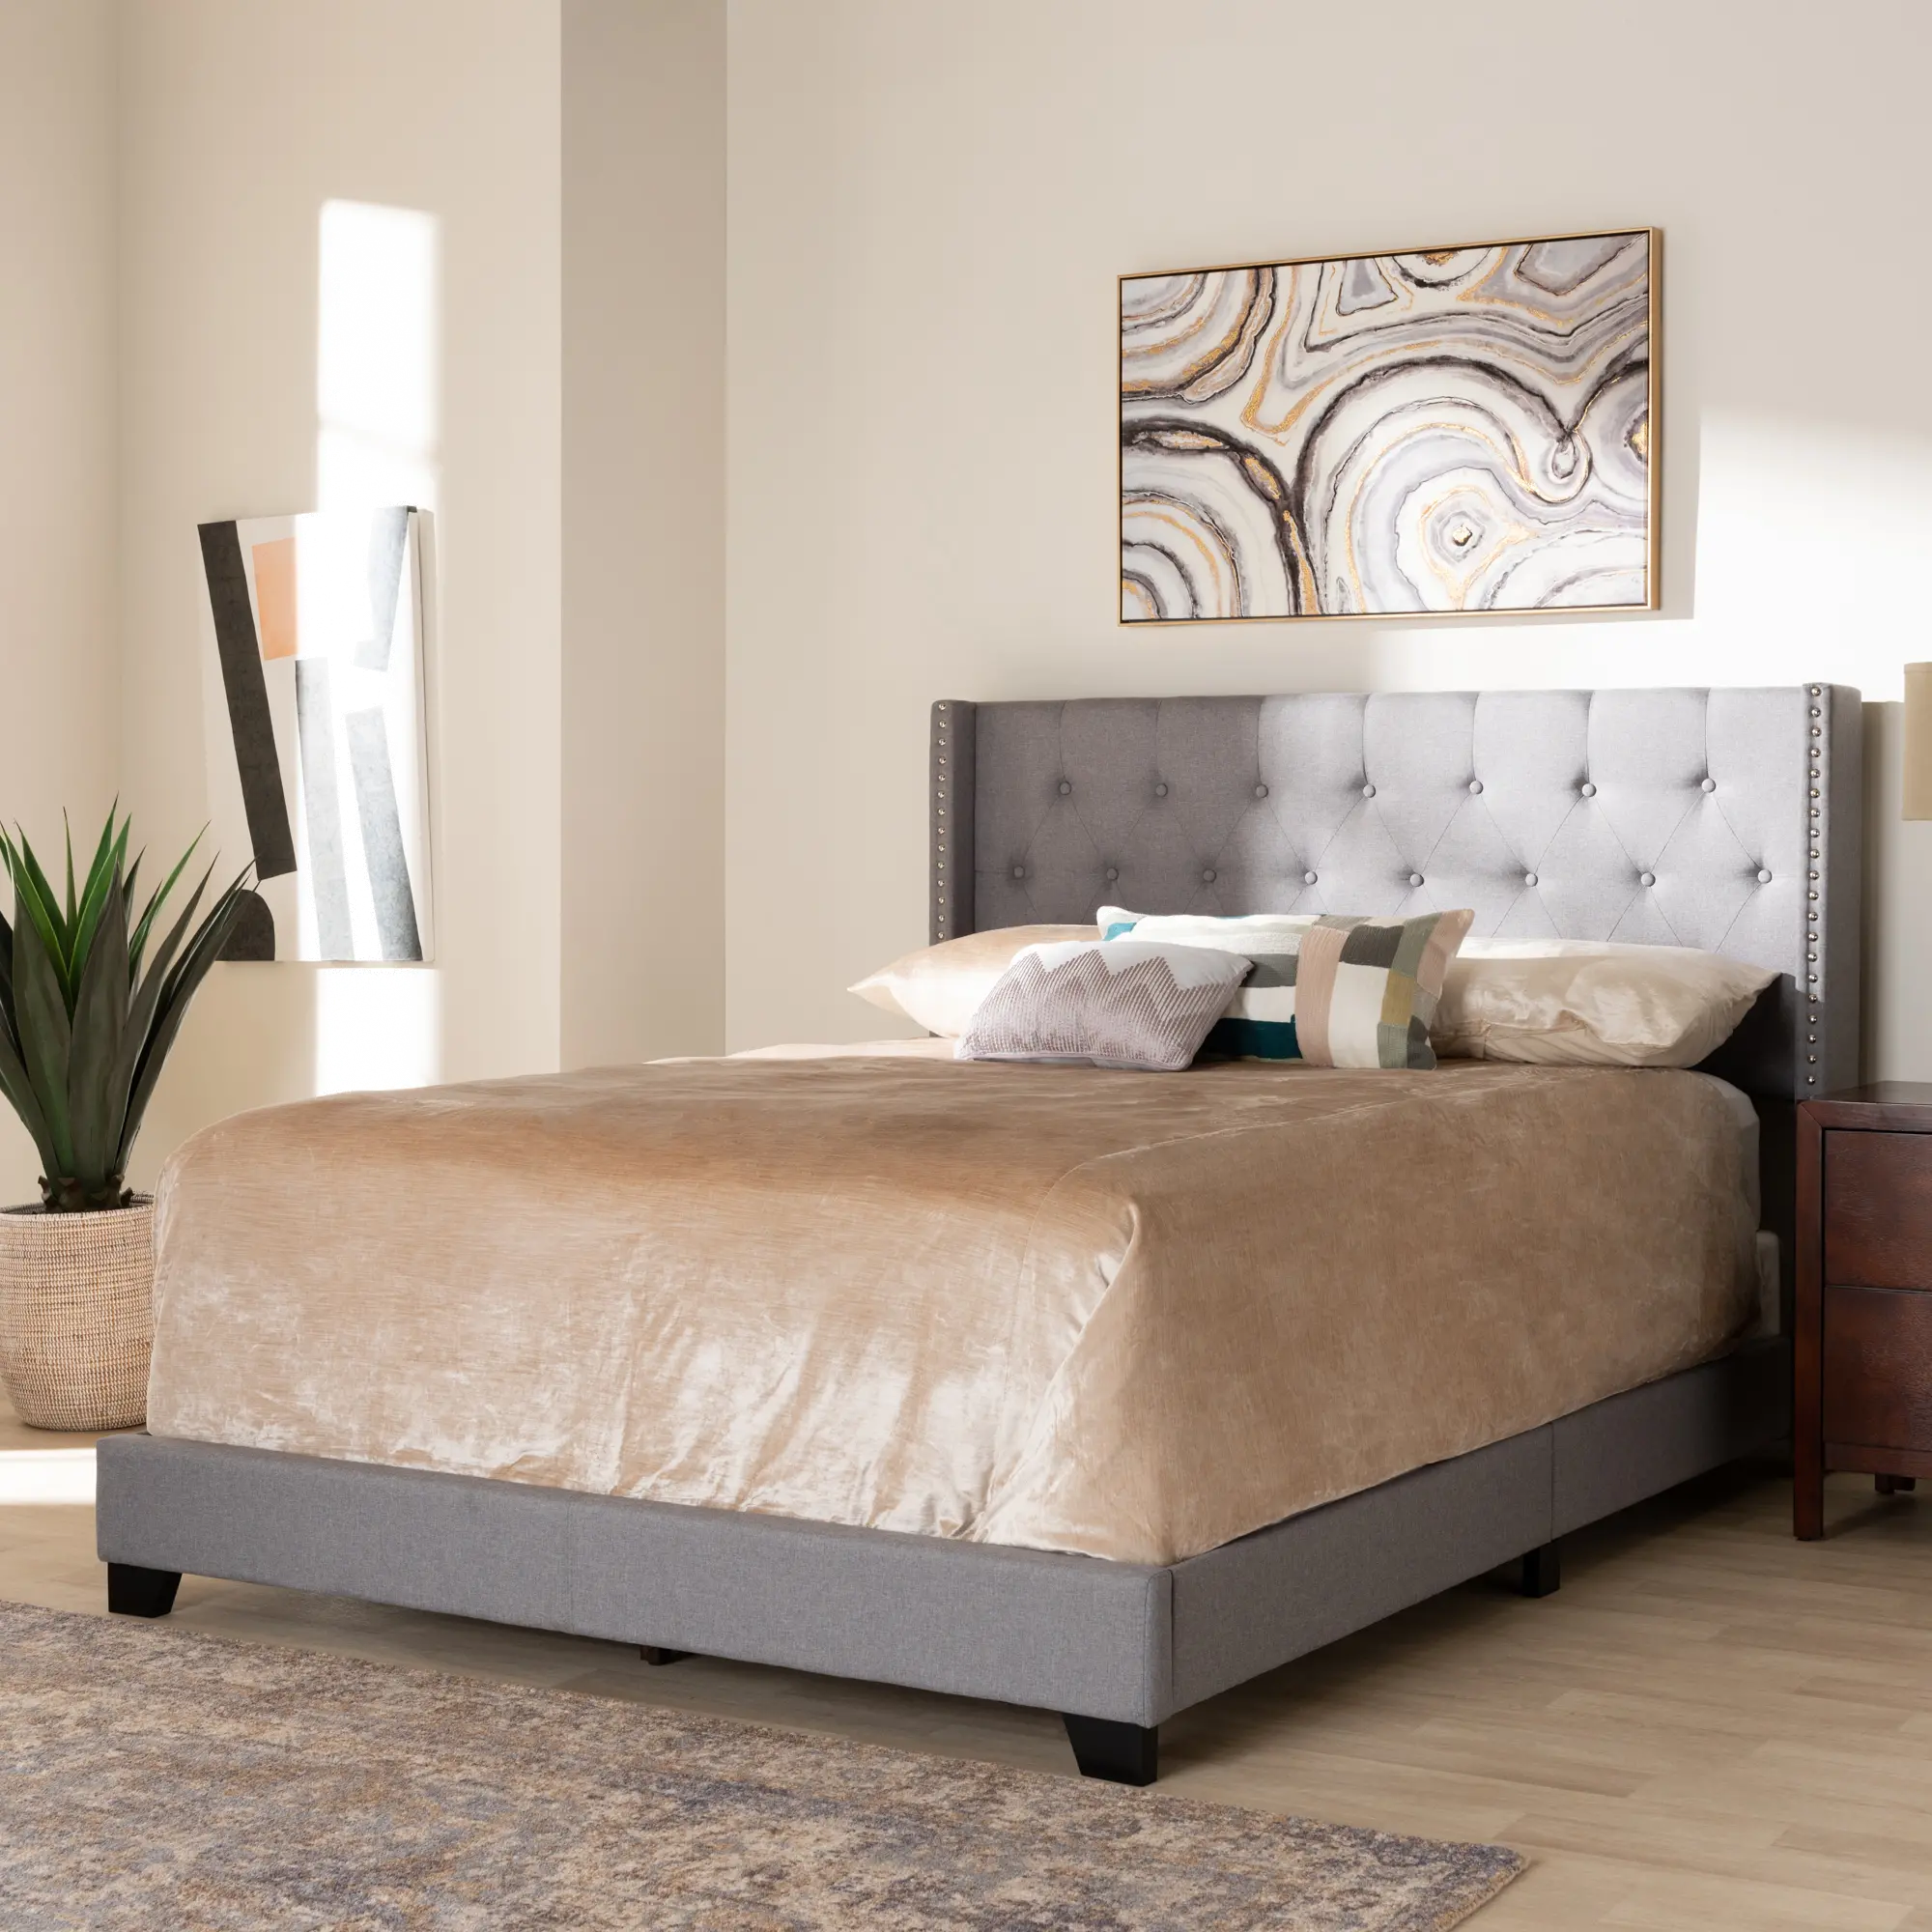 149-8938-RCW Contemporary Light Gray Upholstered Full Bed - Wes sku 149-8938-RCW